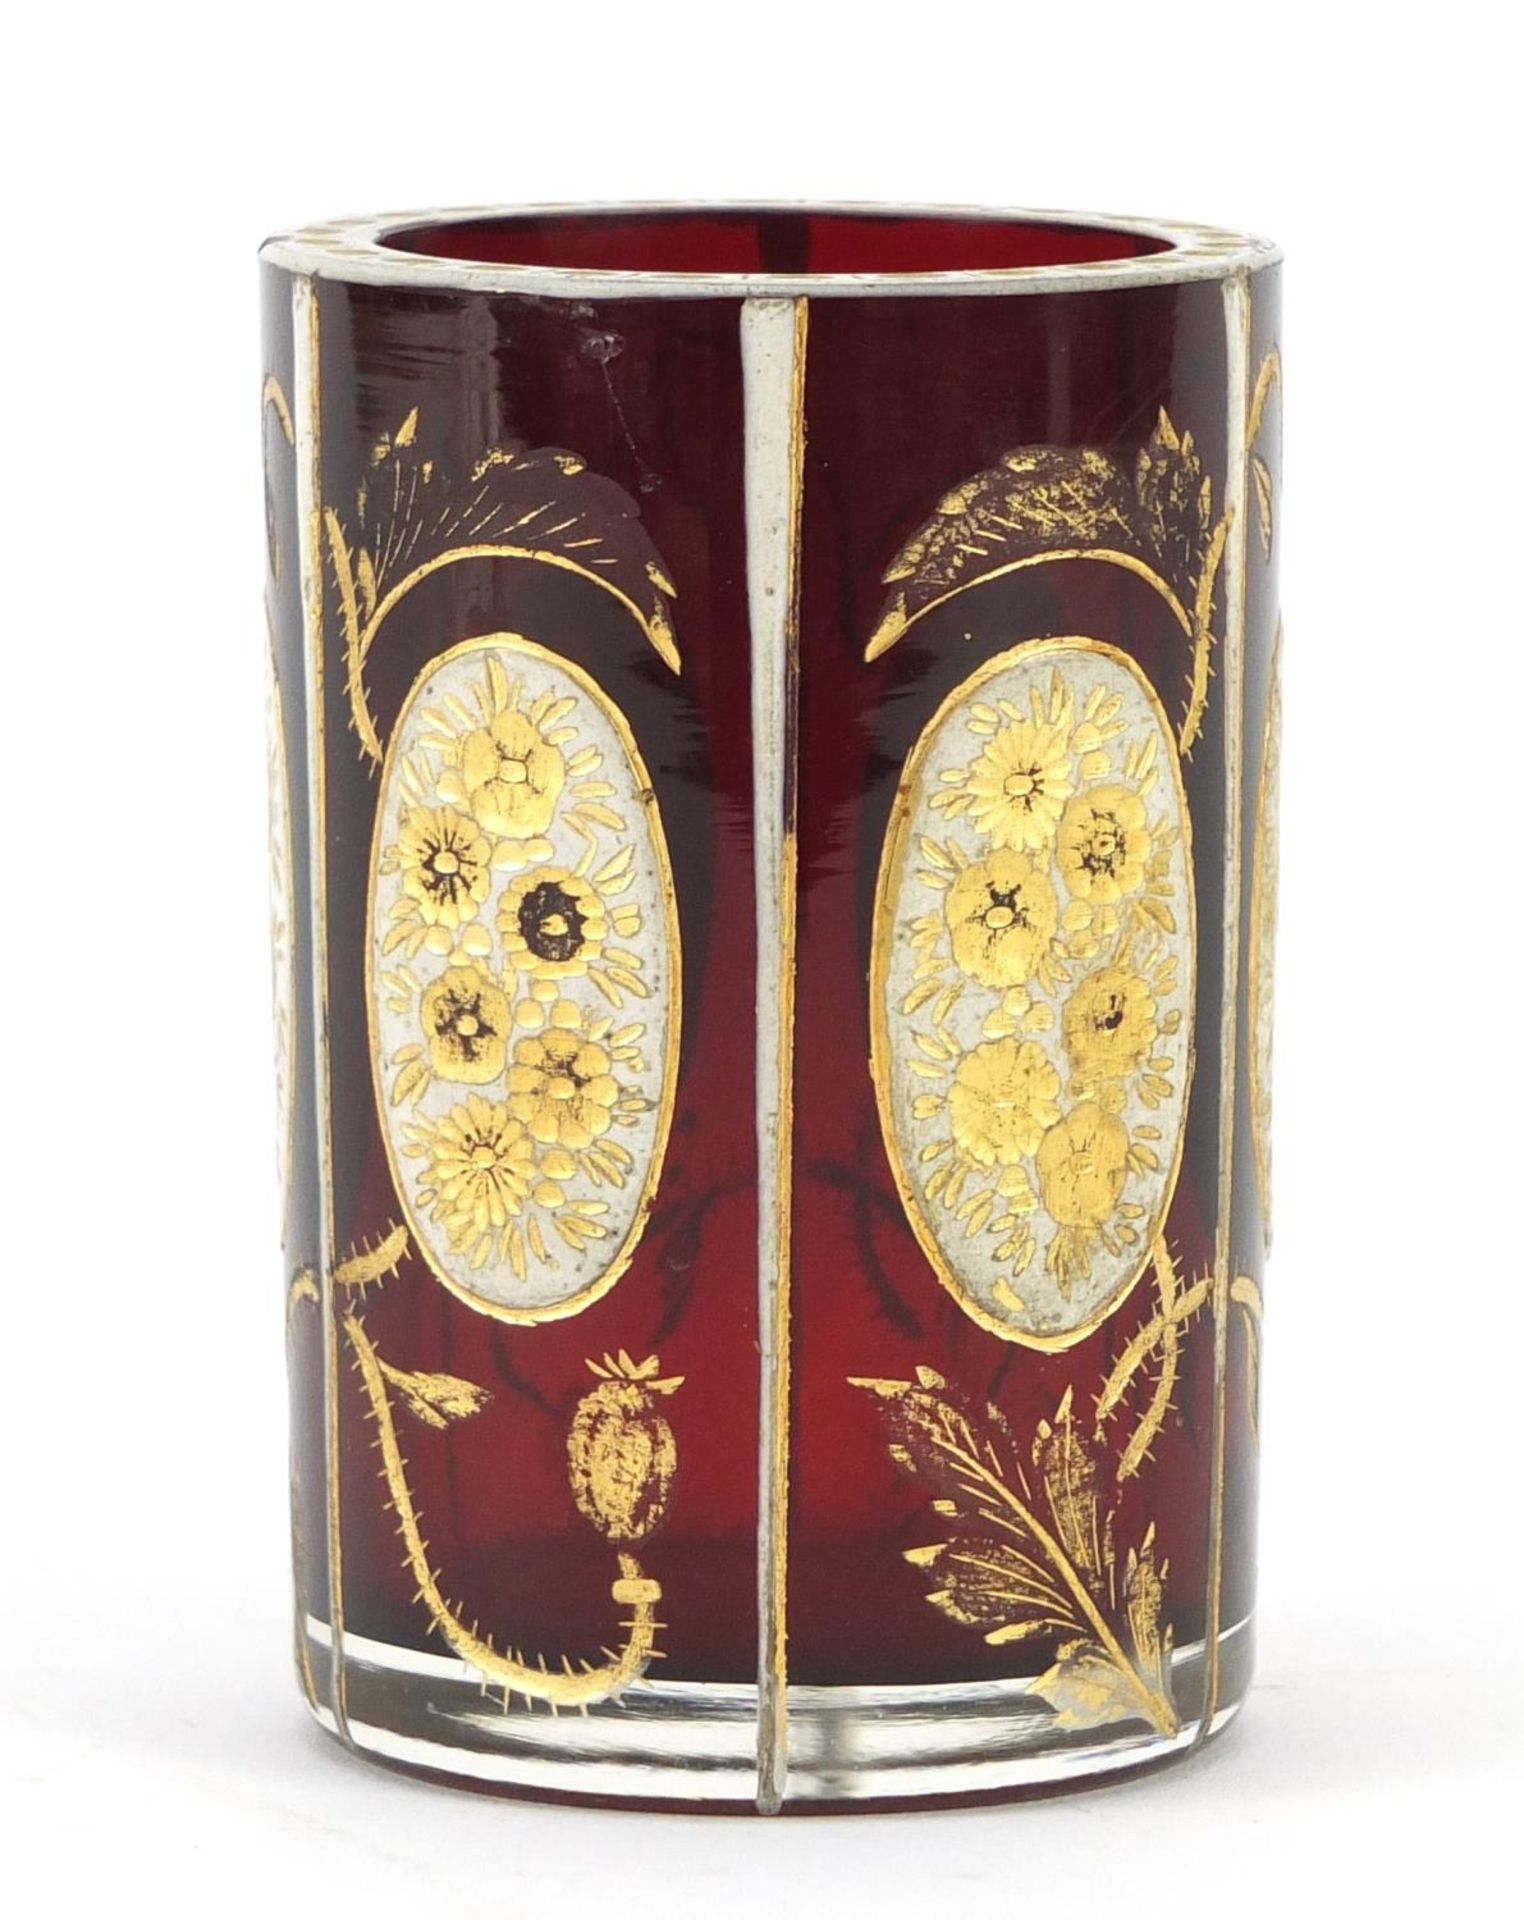 Bohemian ruby glass vase, gilded with flowers and thistles, 7.5cm high There are a few small chips - Image 3 of 8